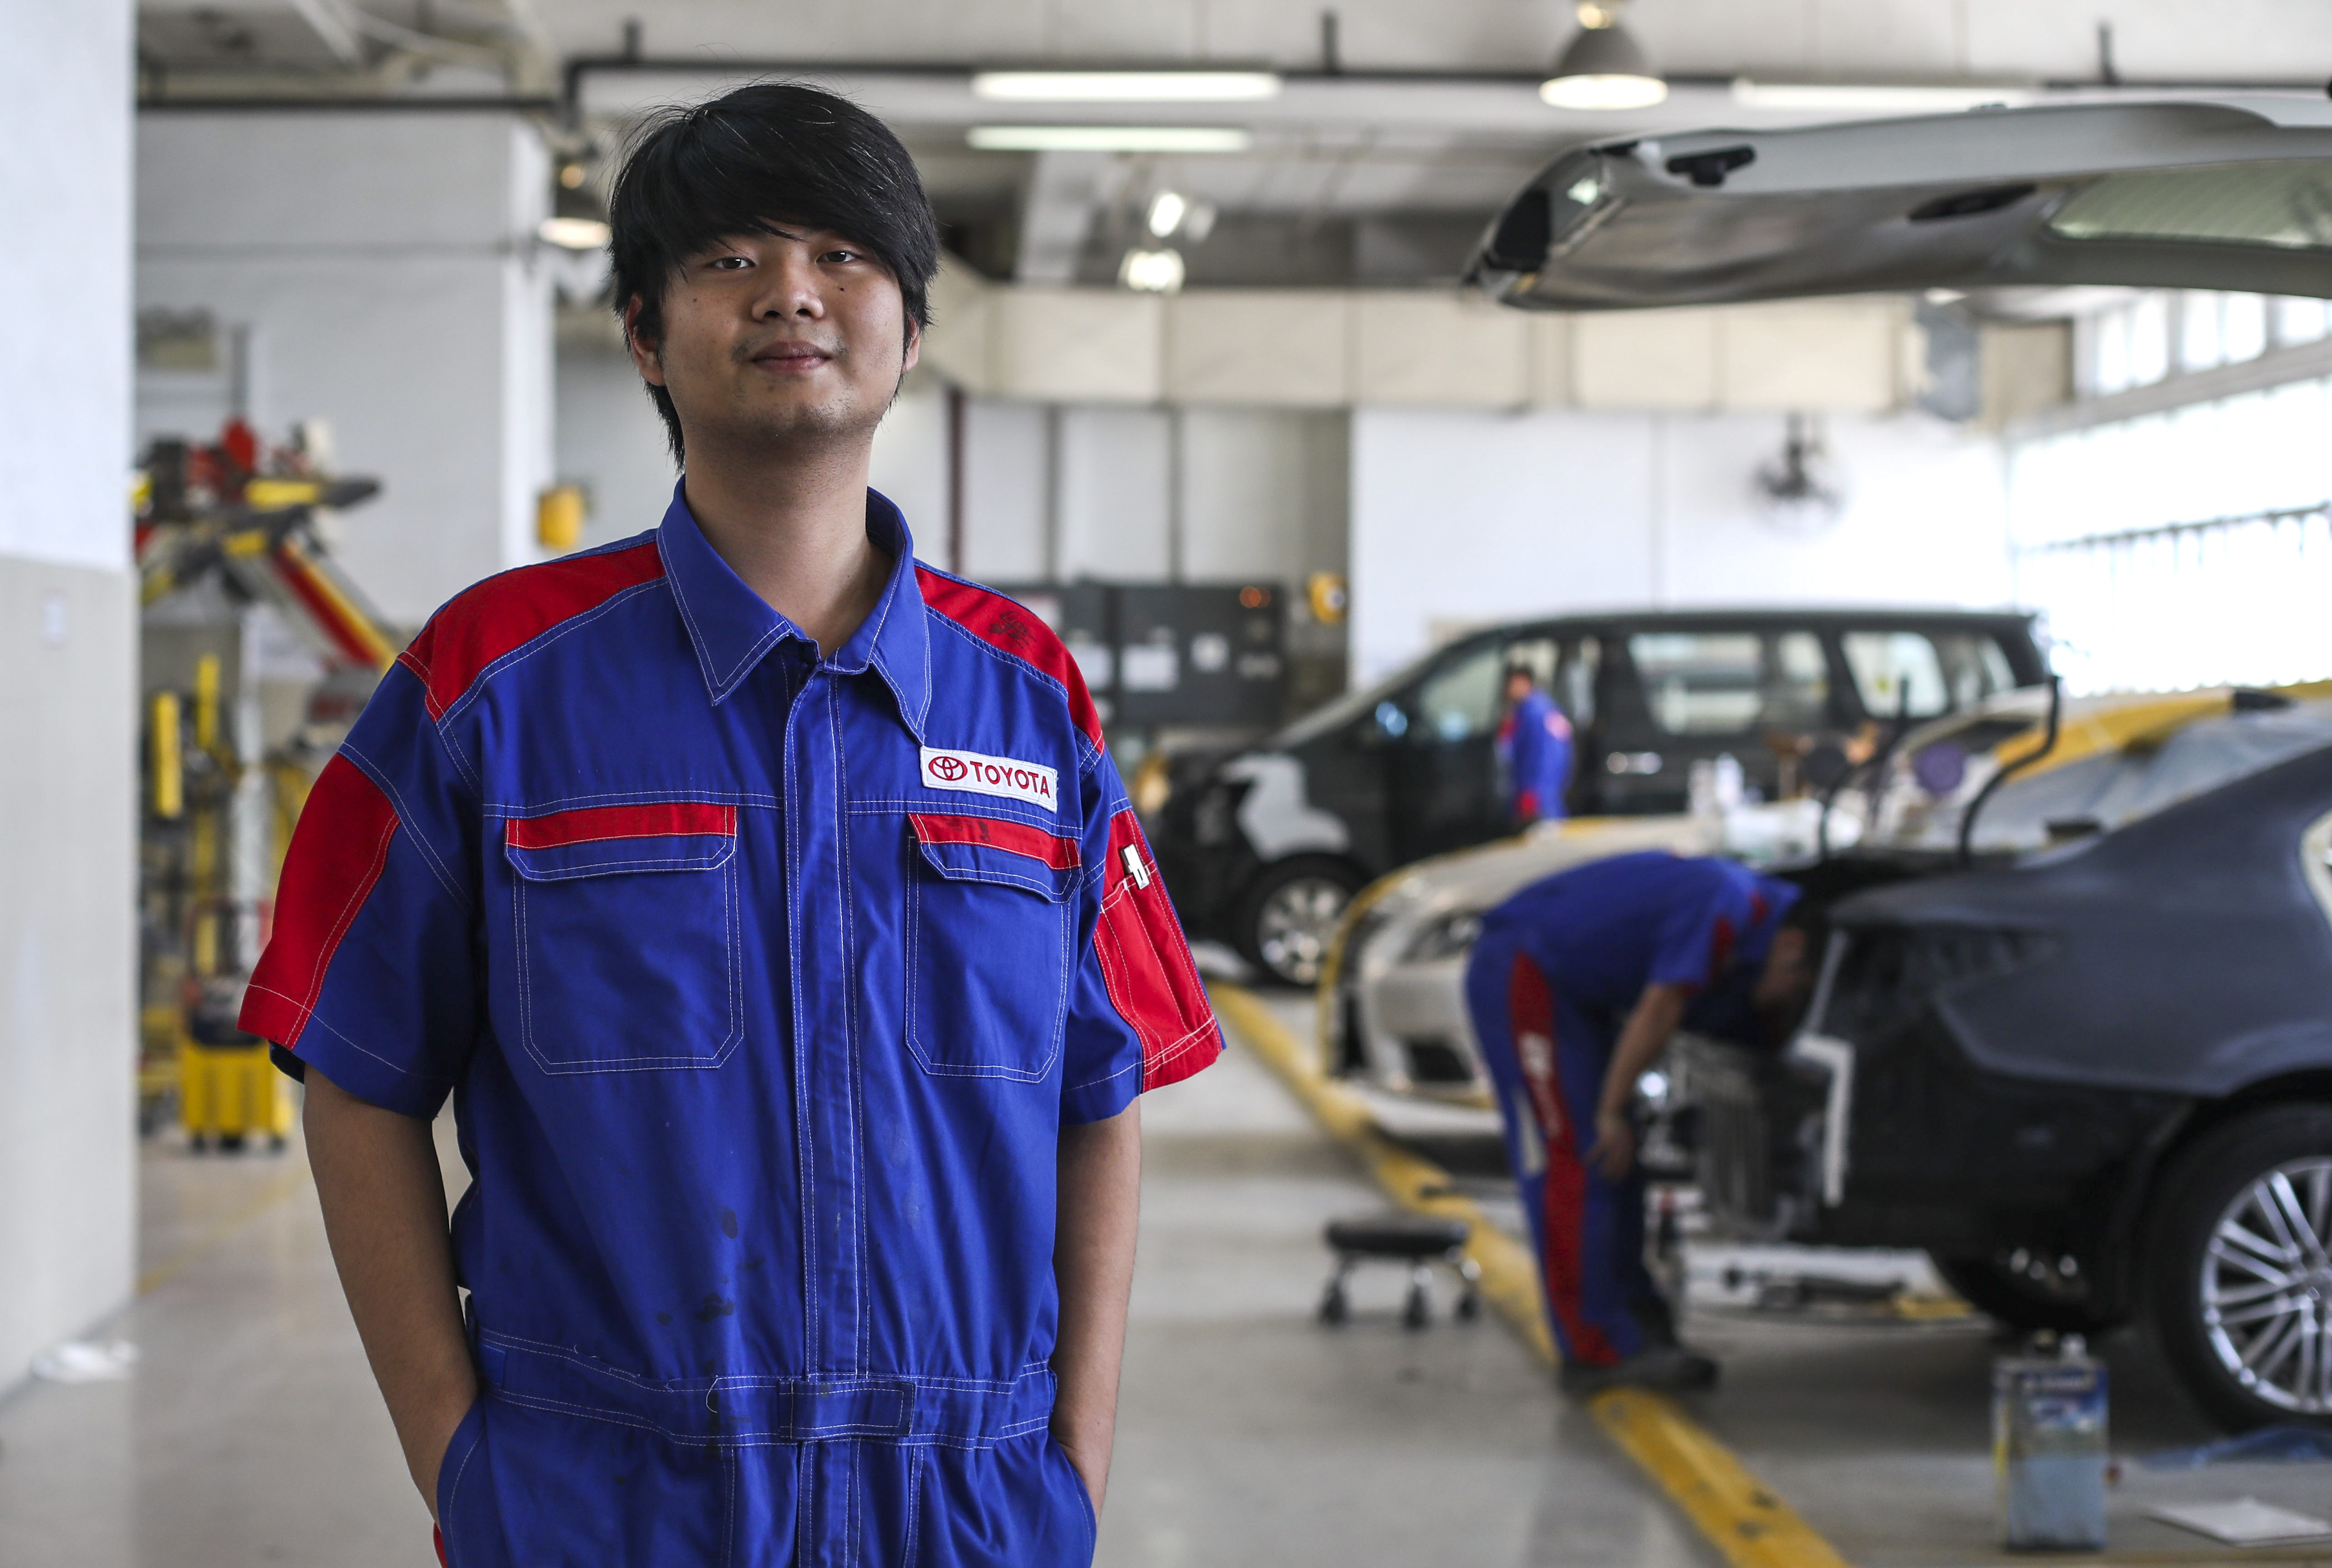 Li Kam-hung’s career in the career has been turbo-charged since he won a category of the WorldSkills Competition in Kazan last August. Photo: Xiaomei Chen